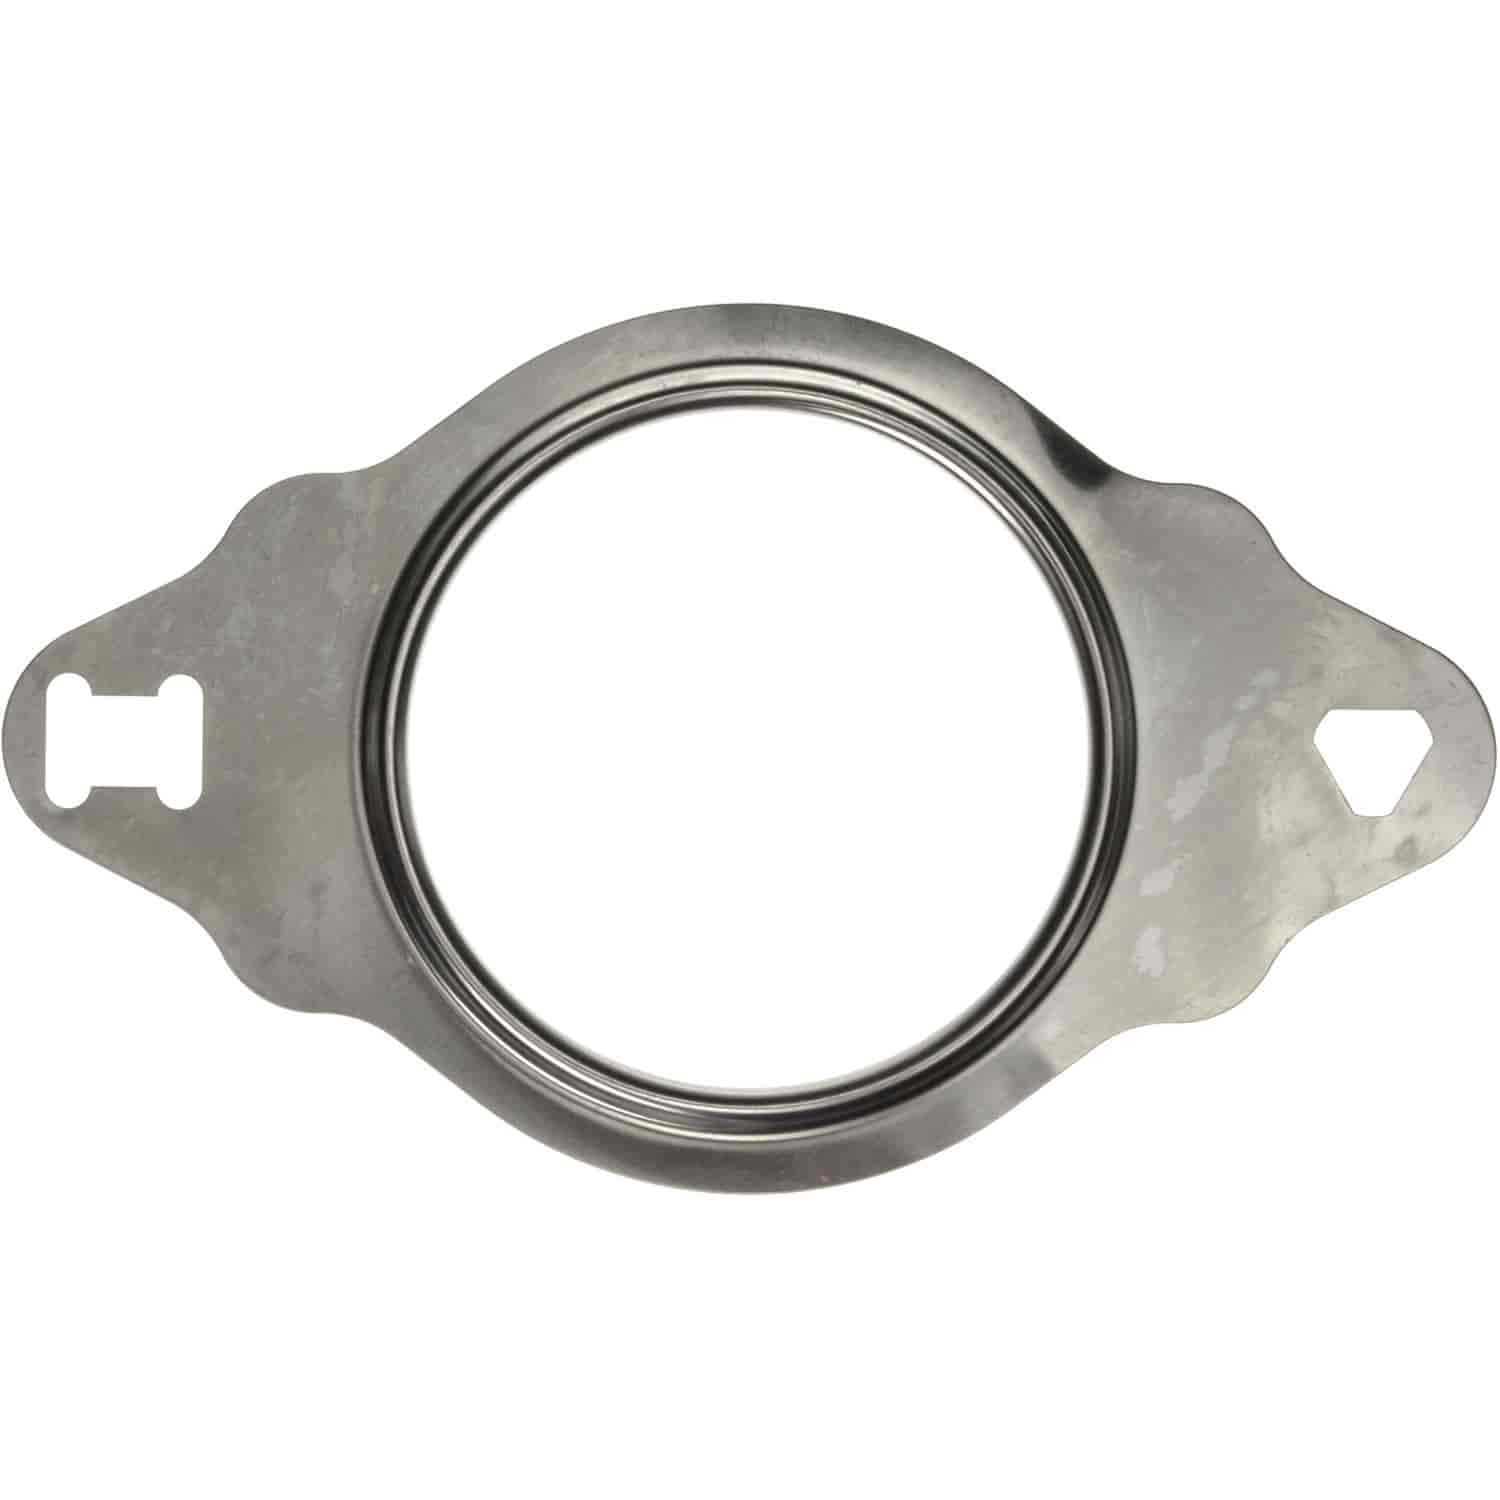 Exhaust Pipe Flange Gasket GMC 231 3.8L 97-2002 FWD Models